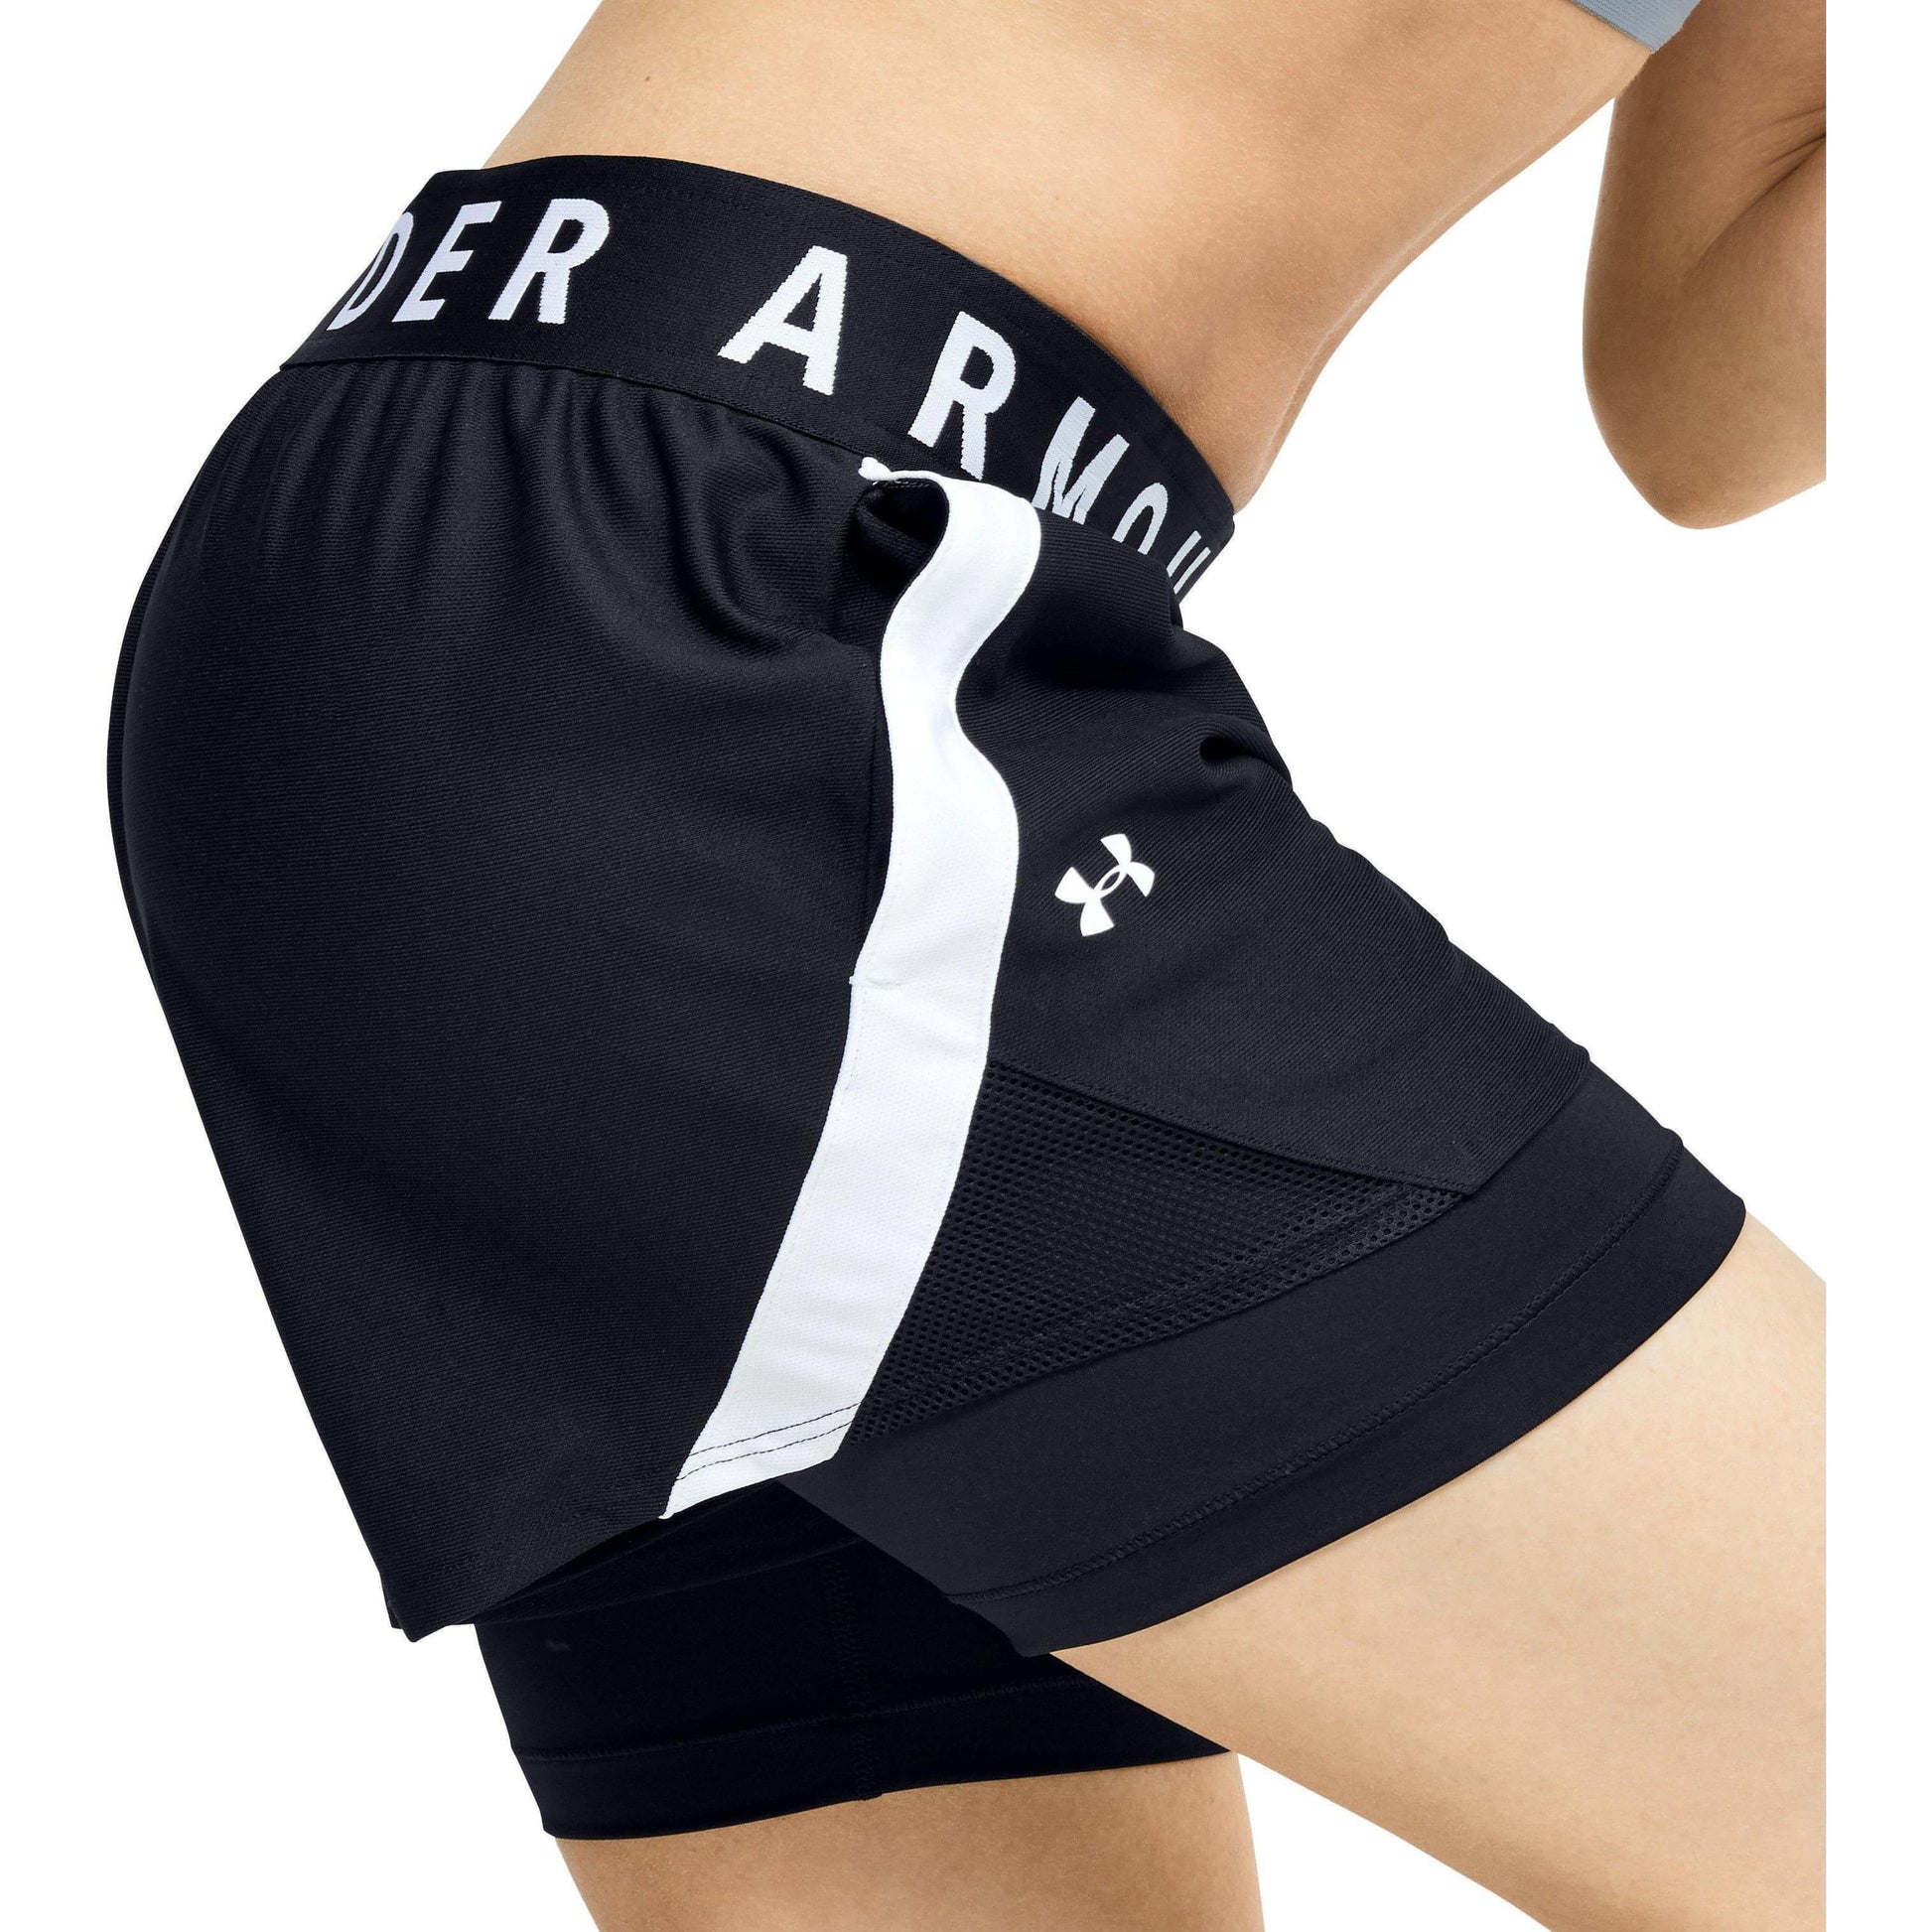 Under Armour Play Up 2 In 1 Womens Training Shorts - Black - Start Fitness